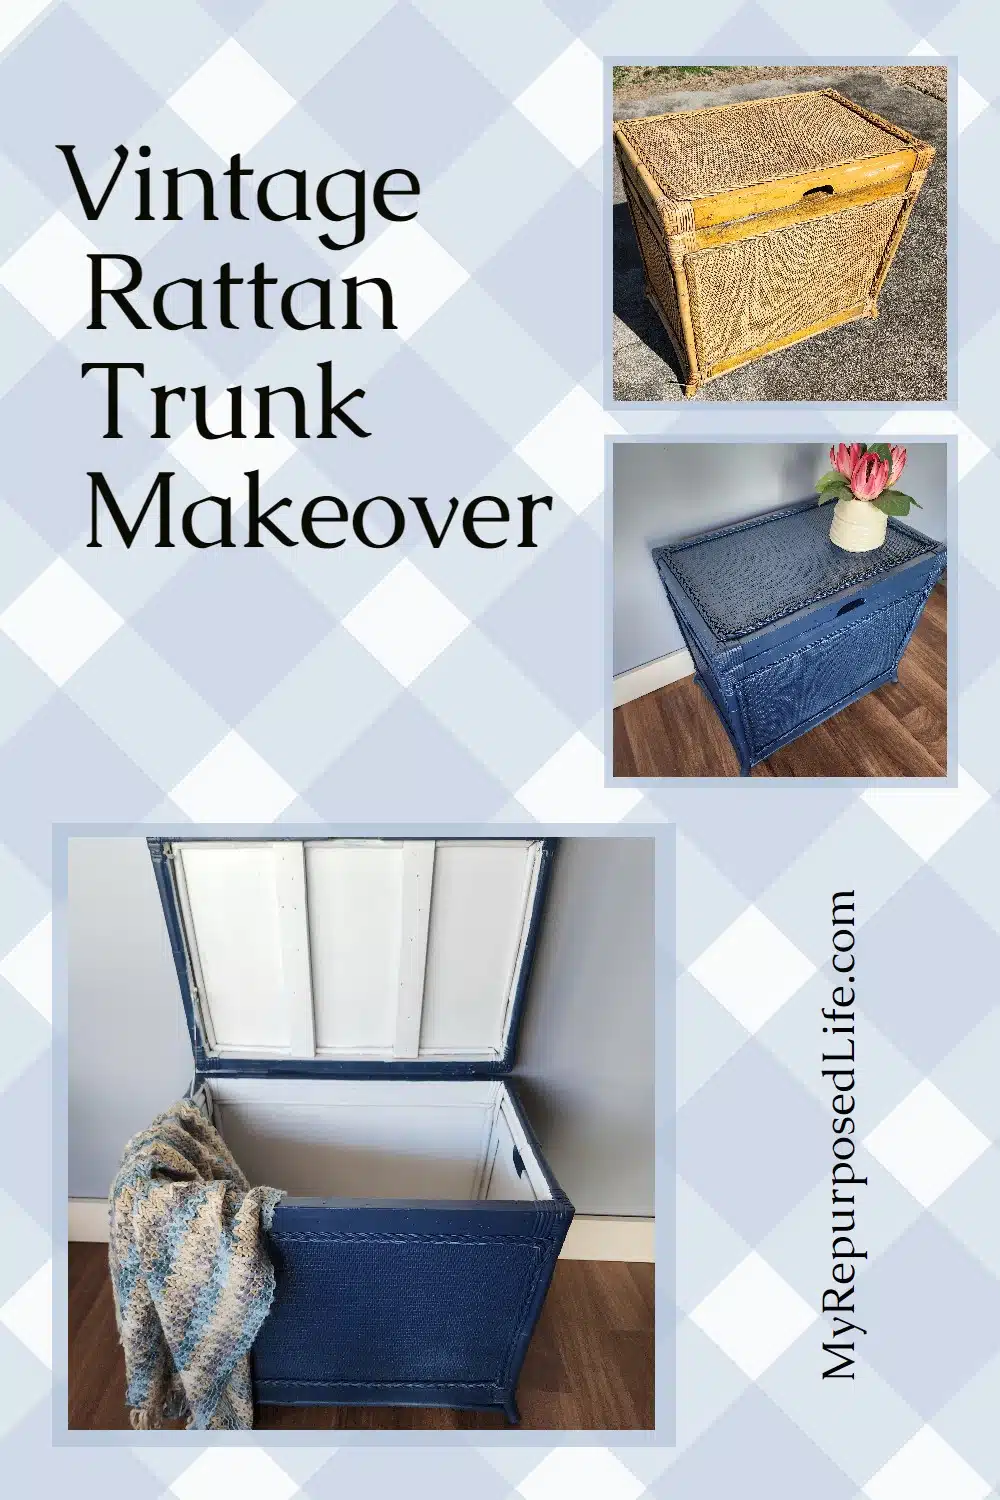 How to give a wicker or rattan trunk an easy makeover. Make repairs, prime, paint an outdated piece of wicker furniture. #MyRepurposedLife via @repurposedlife